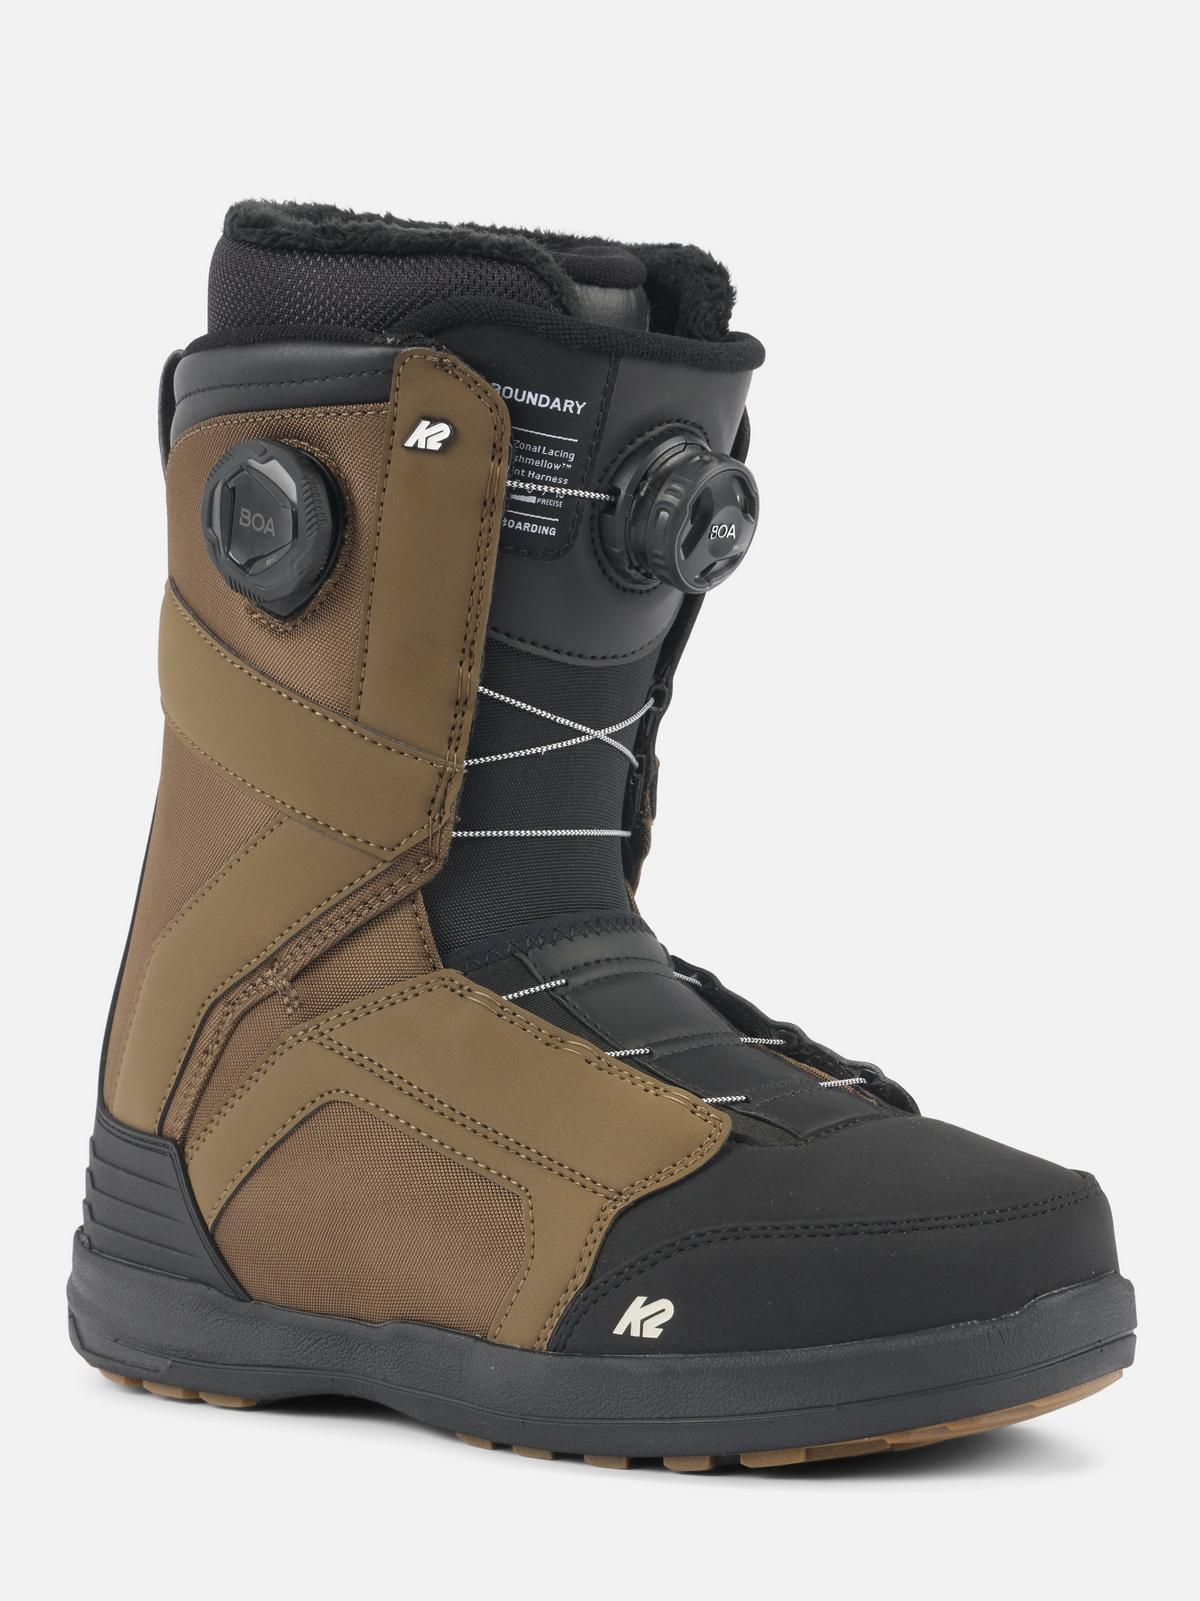 K2 Boundary Men's Snowboard Boots 2024 | K2 Skis and K2 